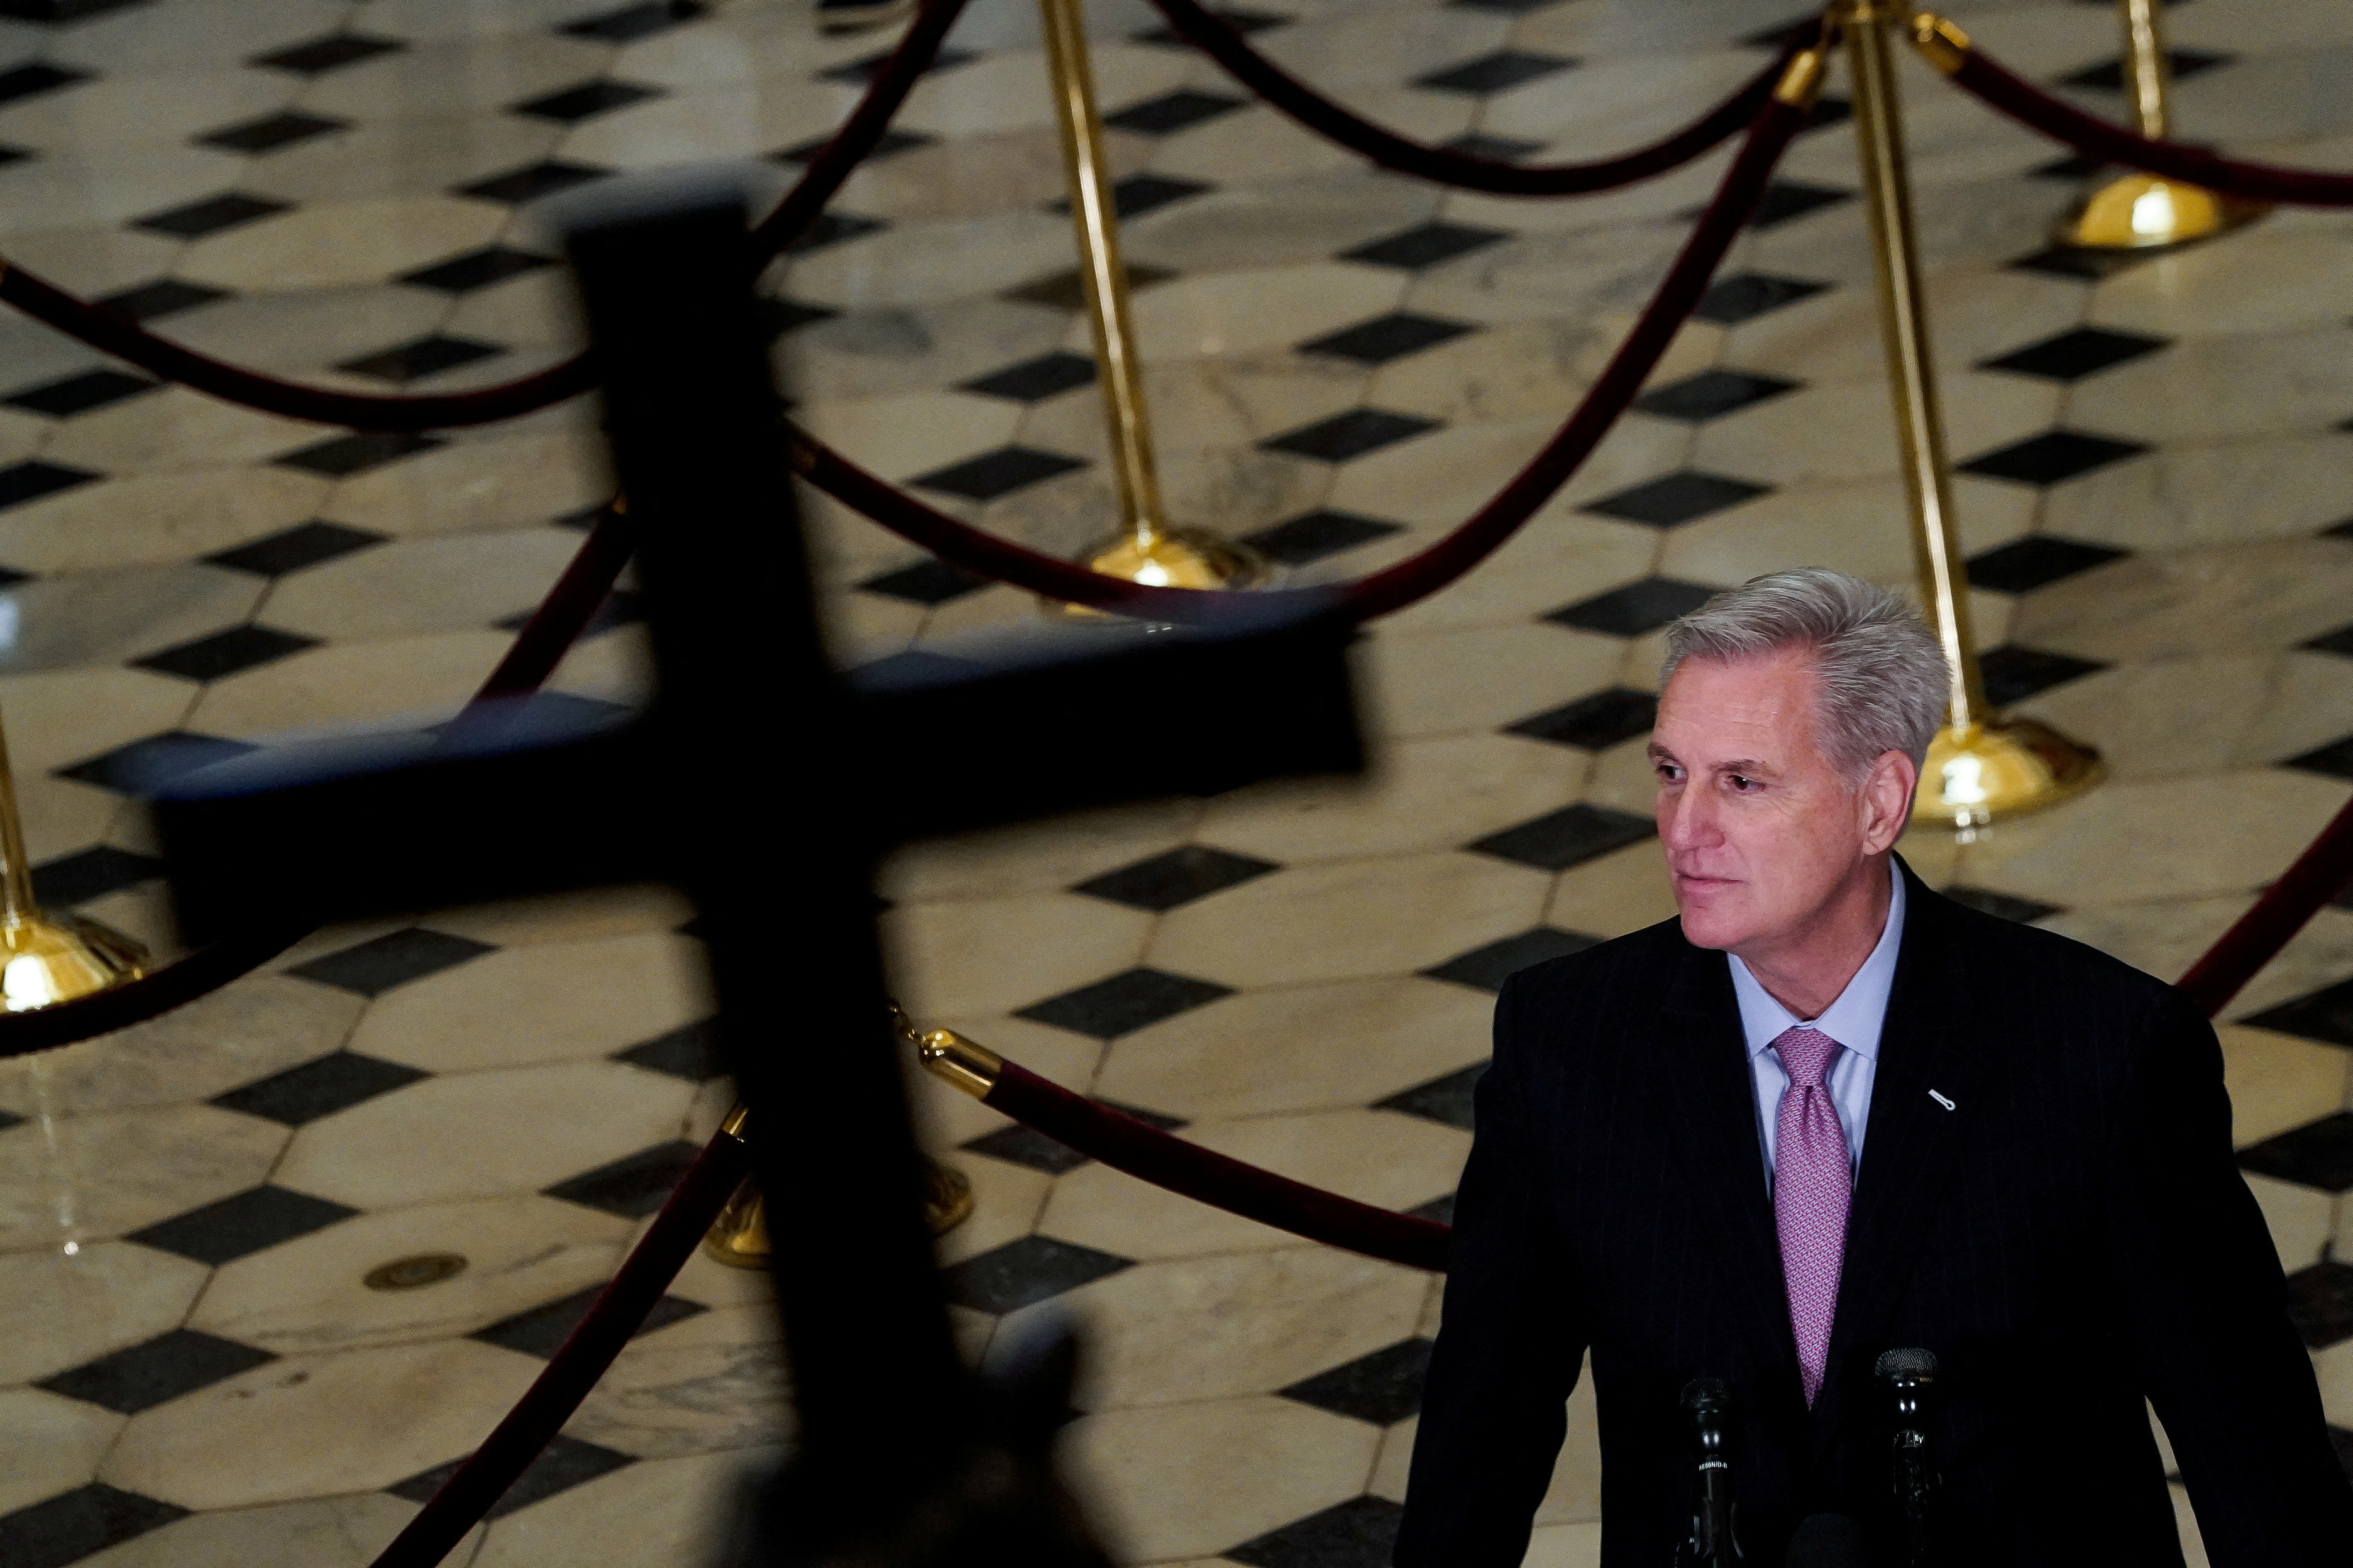 U.S. Speaker of the House Kevin McCarthy (R-CA) speaks to reporters at the U.S. Capitol in Washington